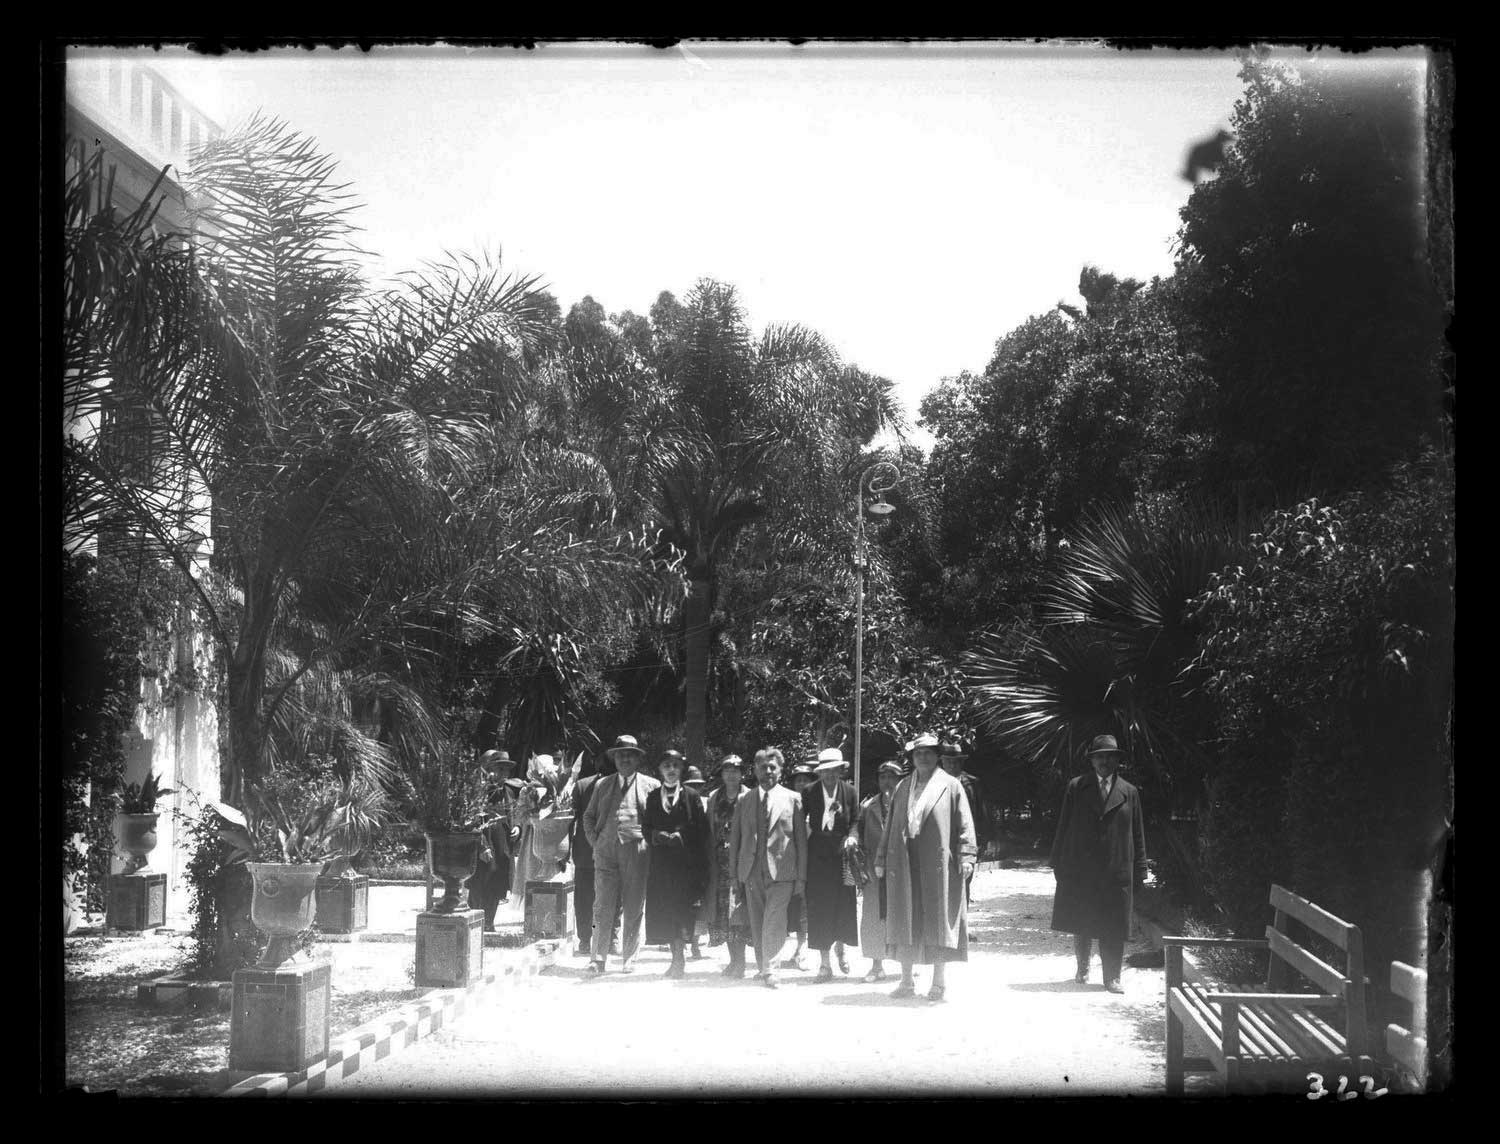 A group in European stroll among the palm trees.